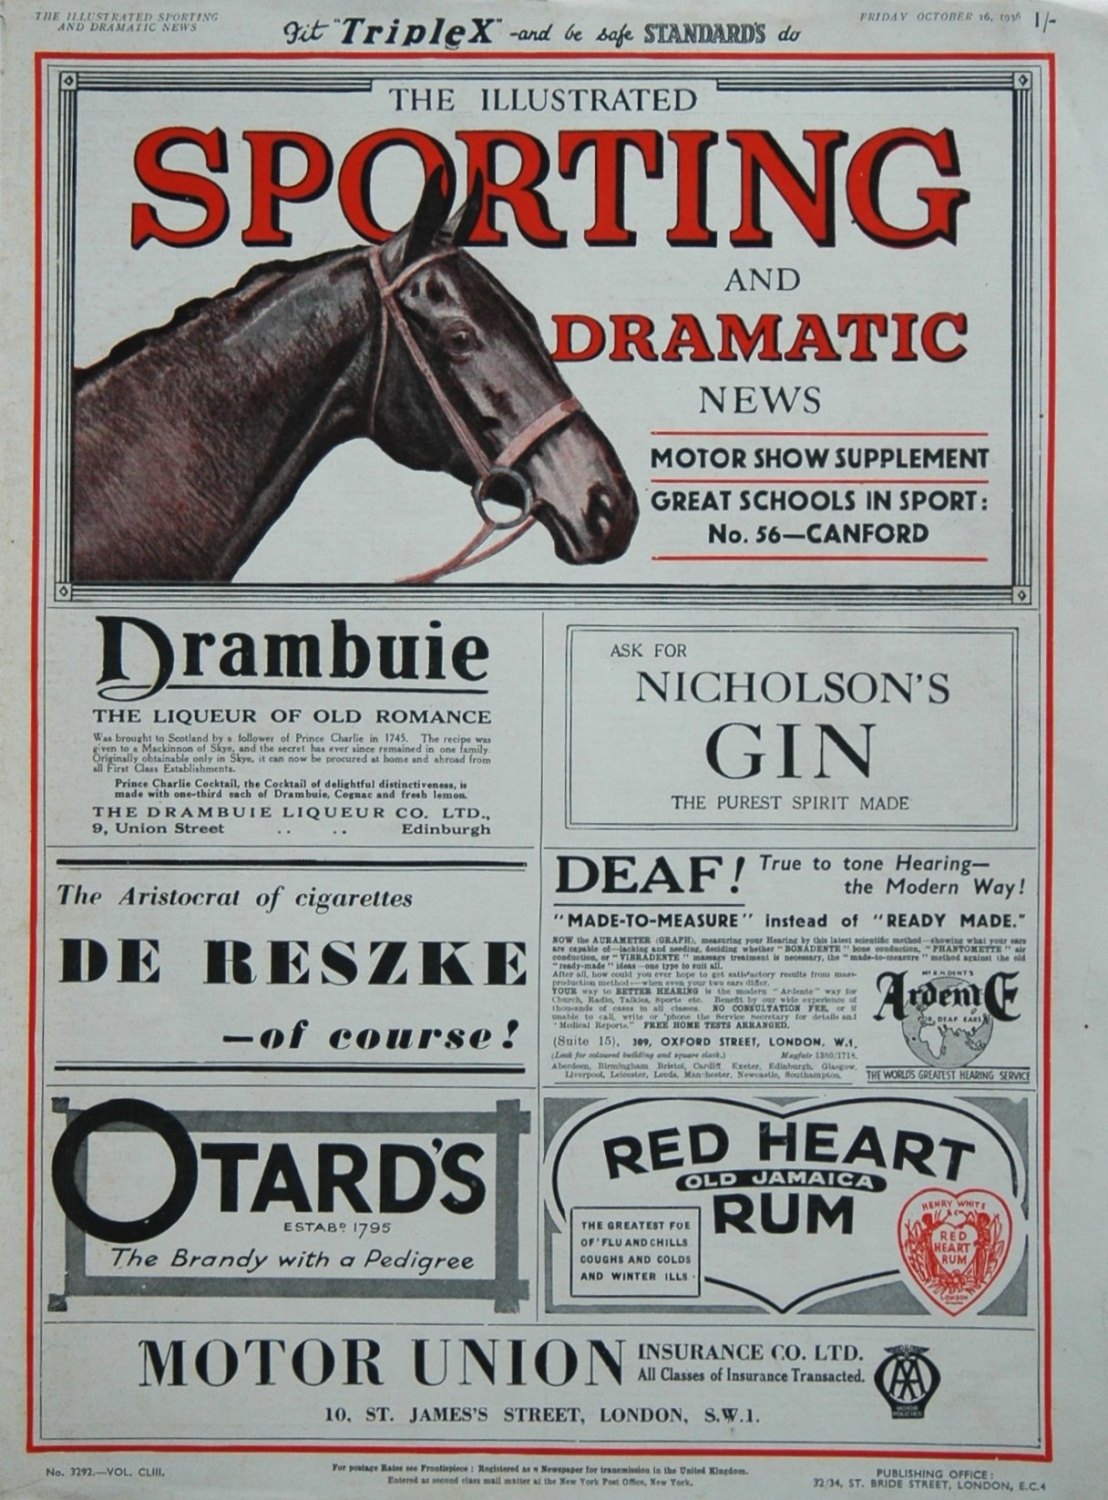 Illustrated Sporting and Dramatic News October 16th 1936.